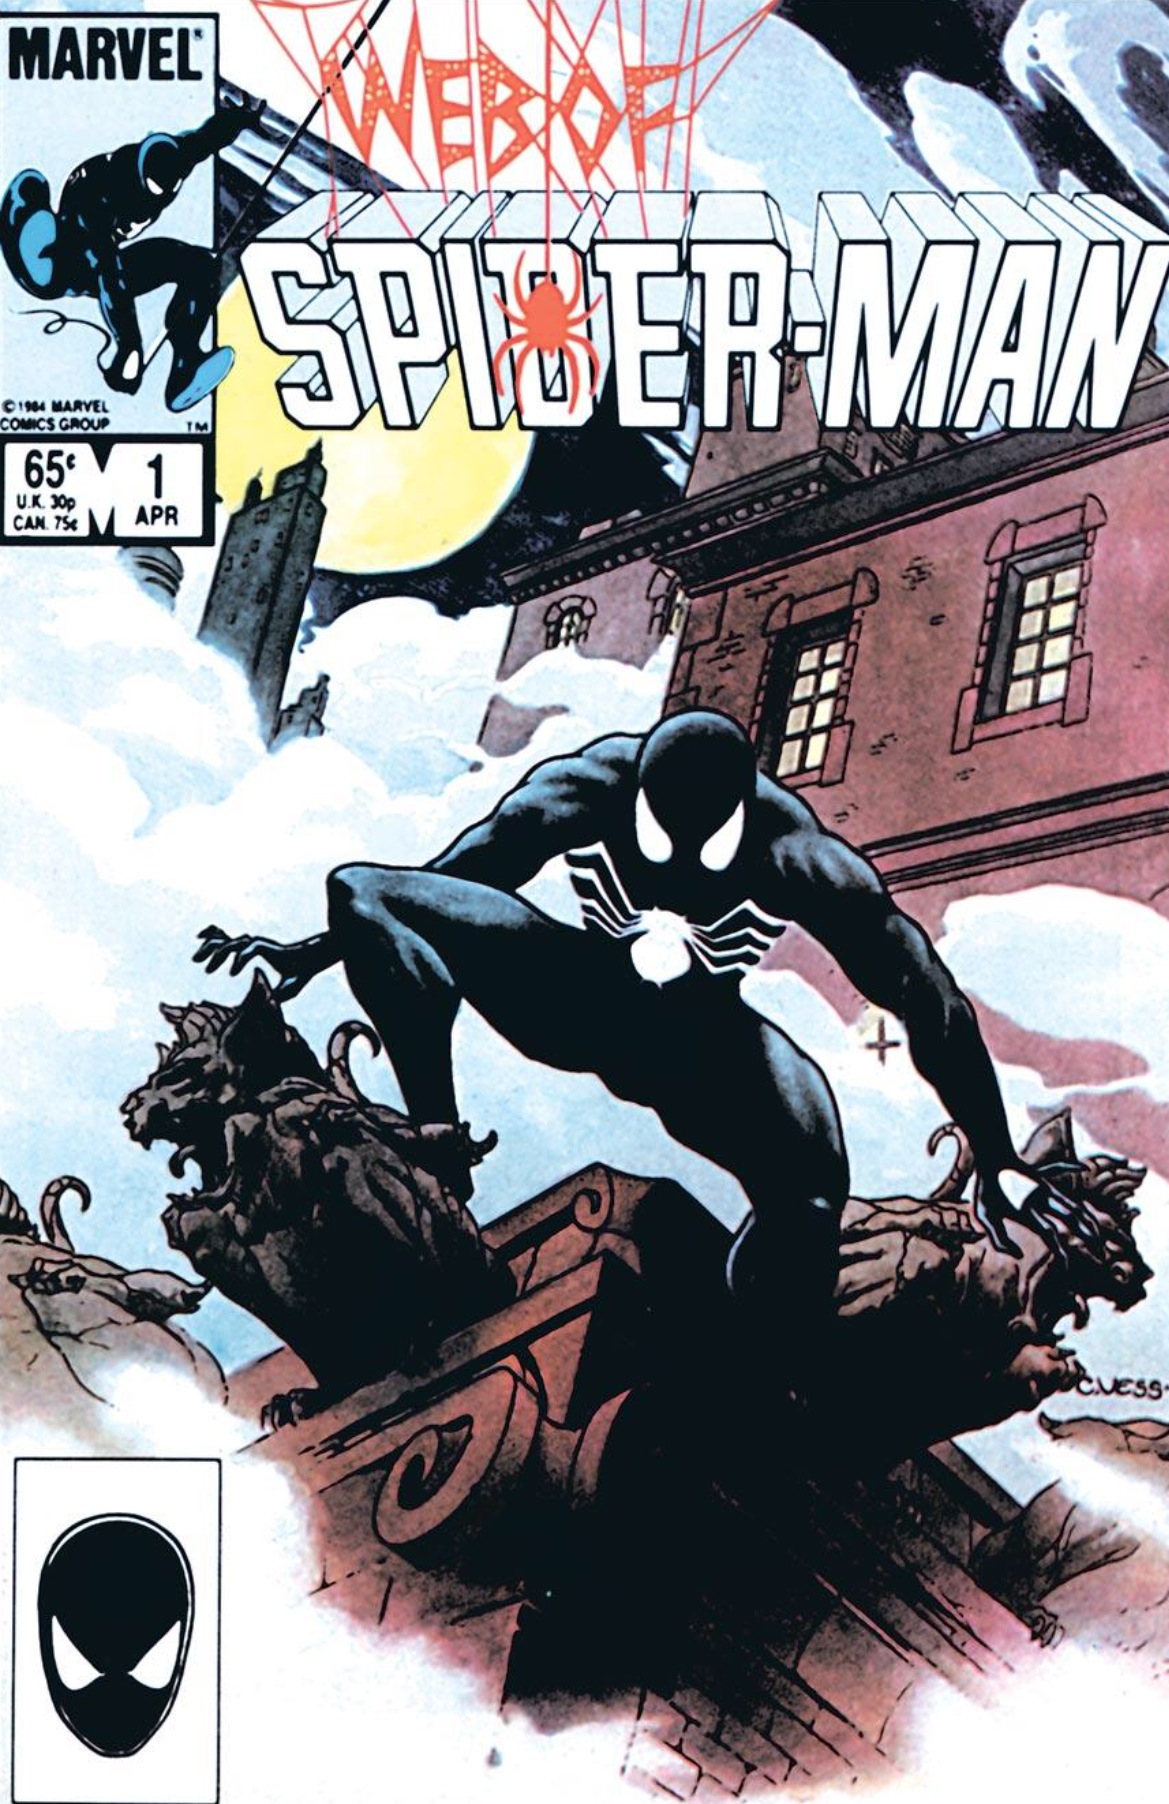 Web of Spider-Man #1 and What Makes a Comic “Important?”